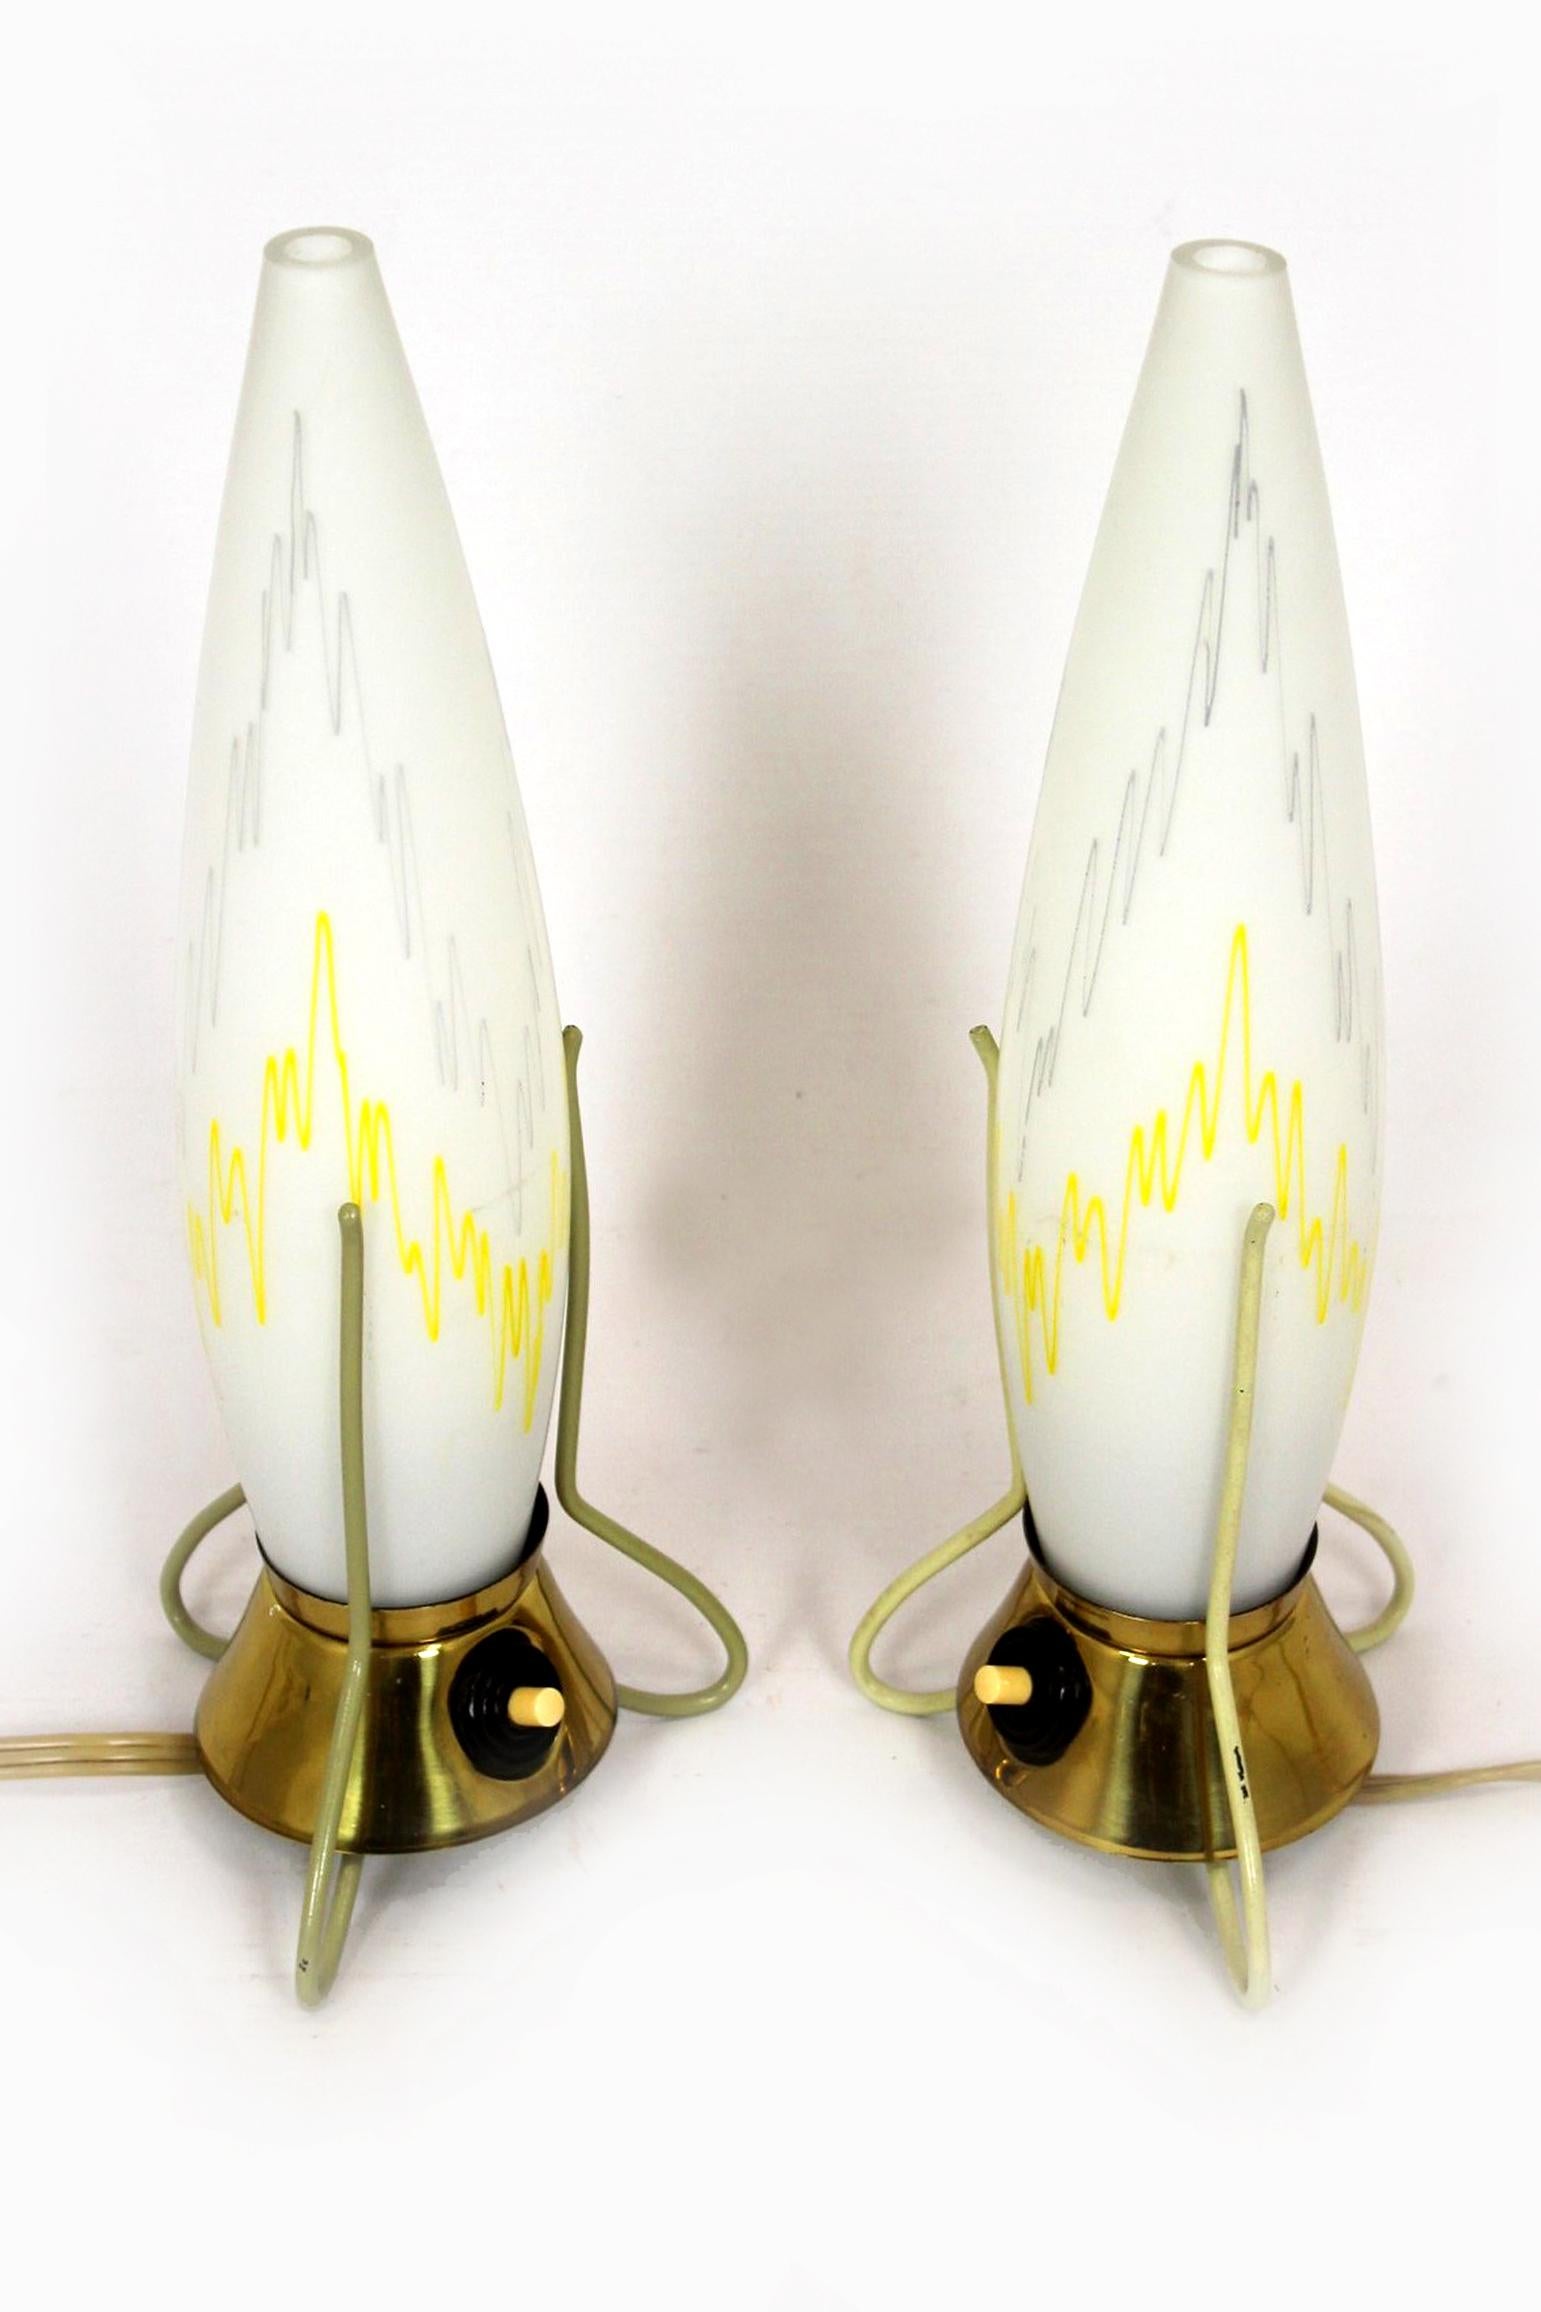 
These rocket table lamps were produced by Zukov in the 1960s in Czechoslovakia.
Lamps are fully functional, require E14 bulbs.